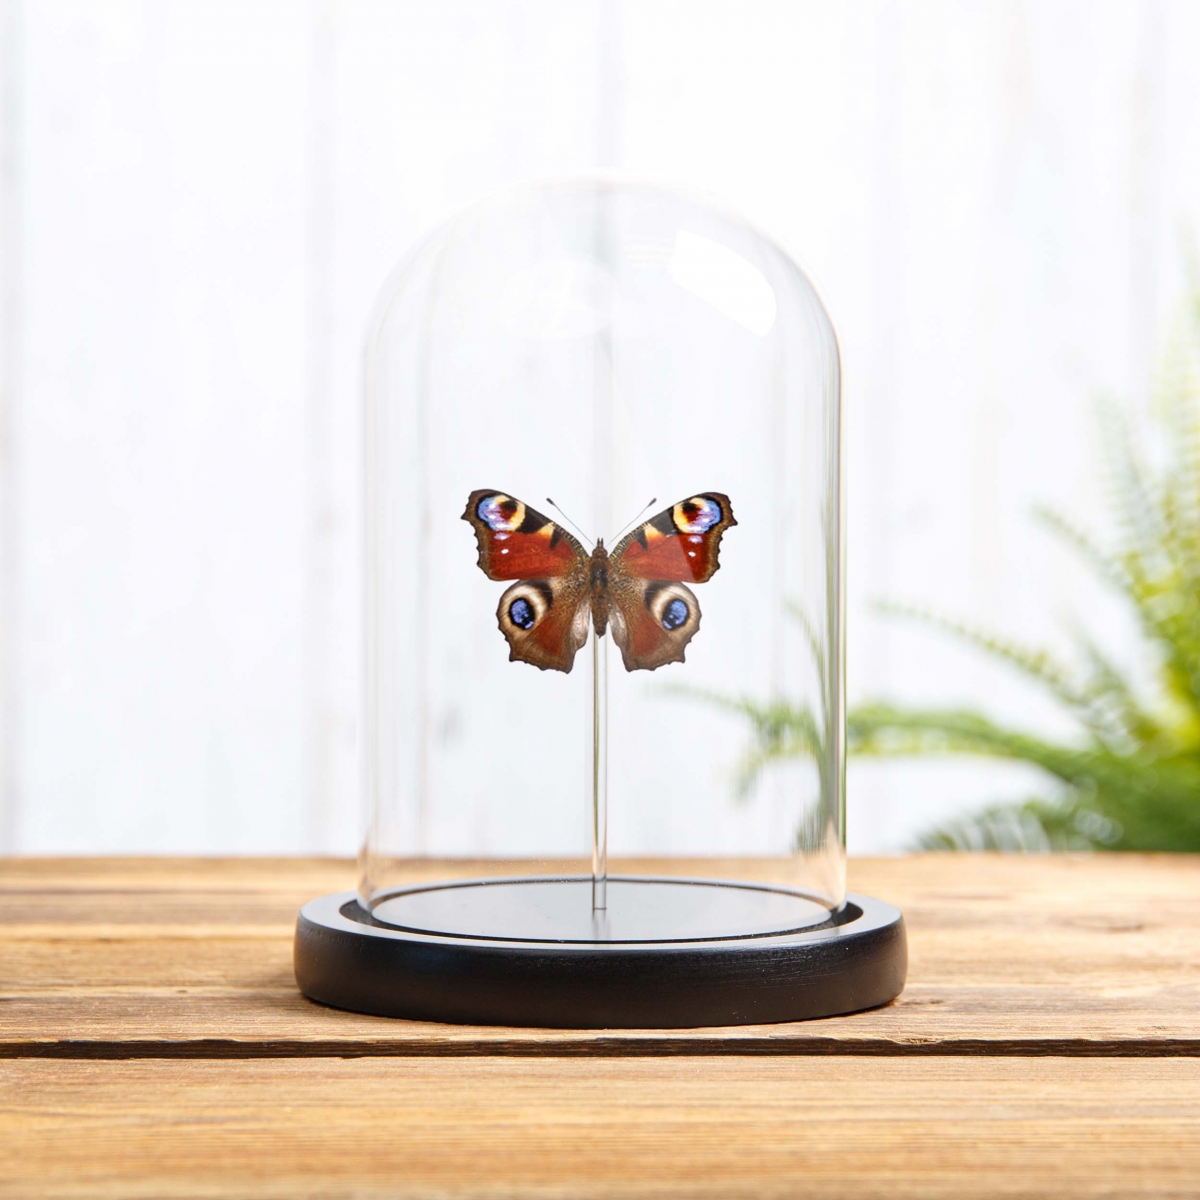 Minibeast The Peacock Butterfly in Glass Dome with Wooden Base (Aglais io)